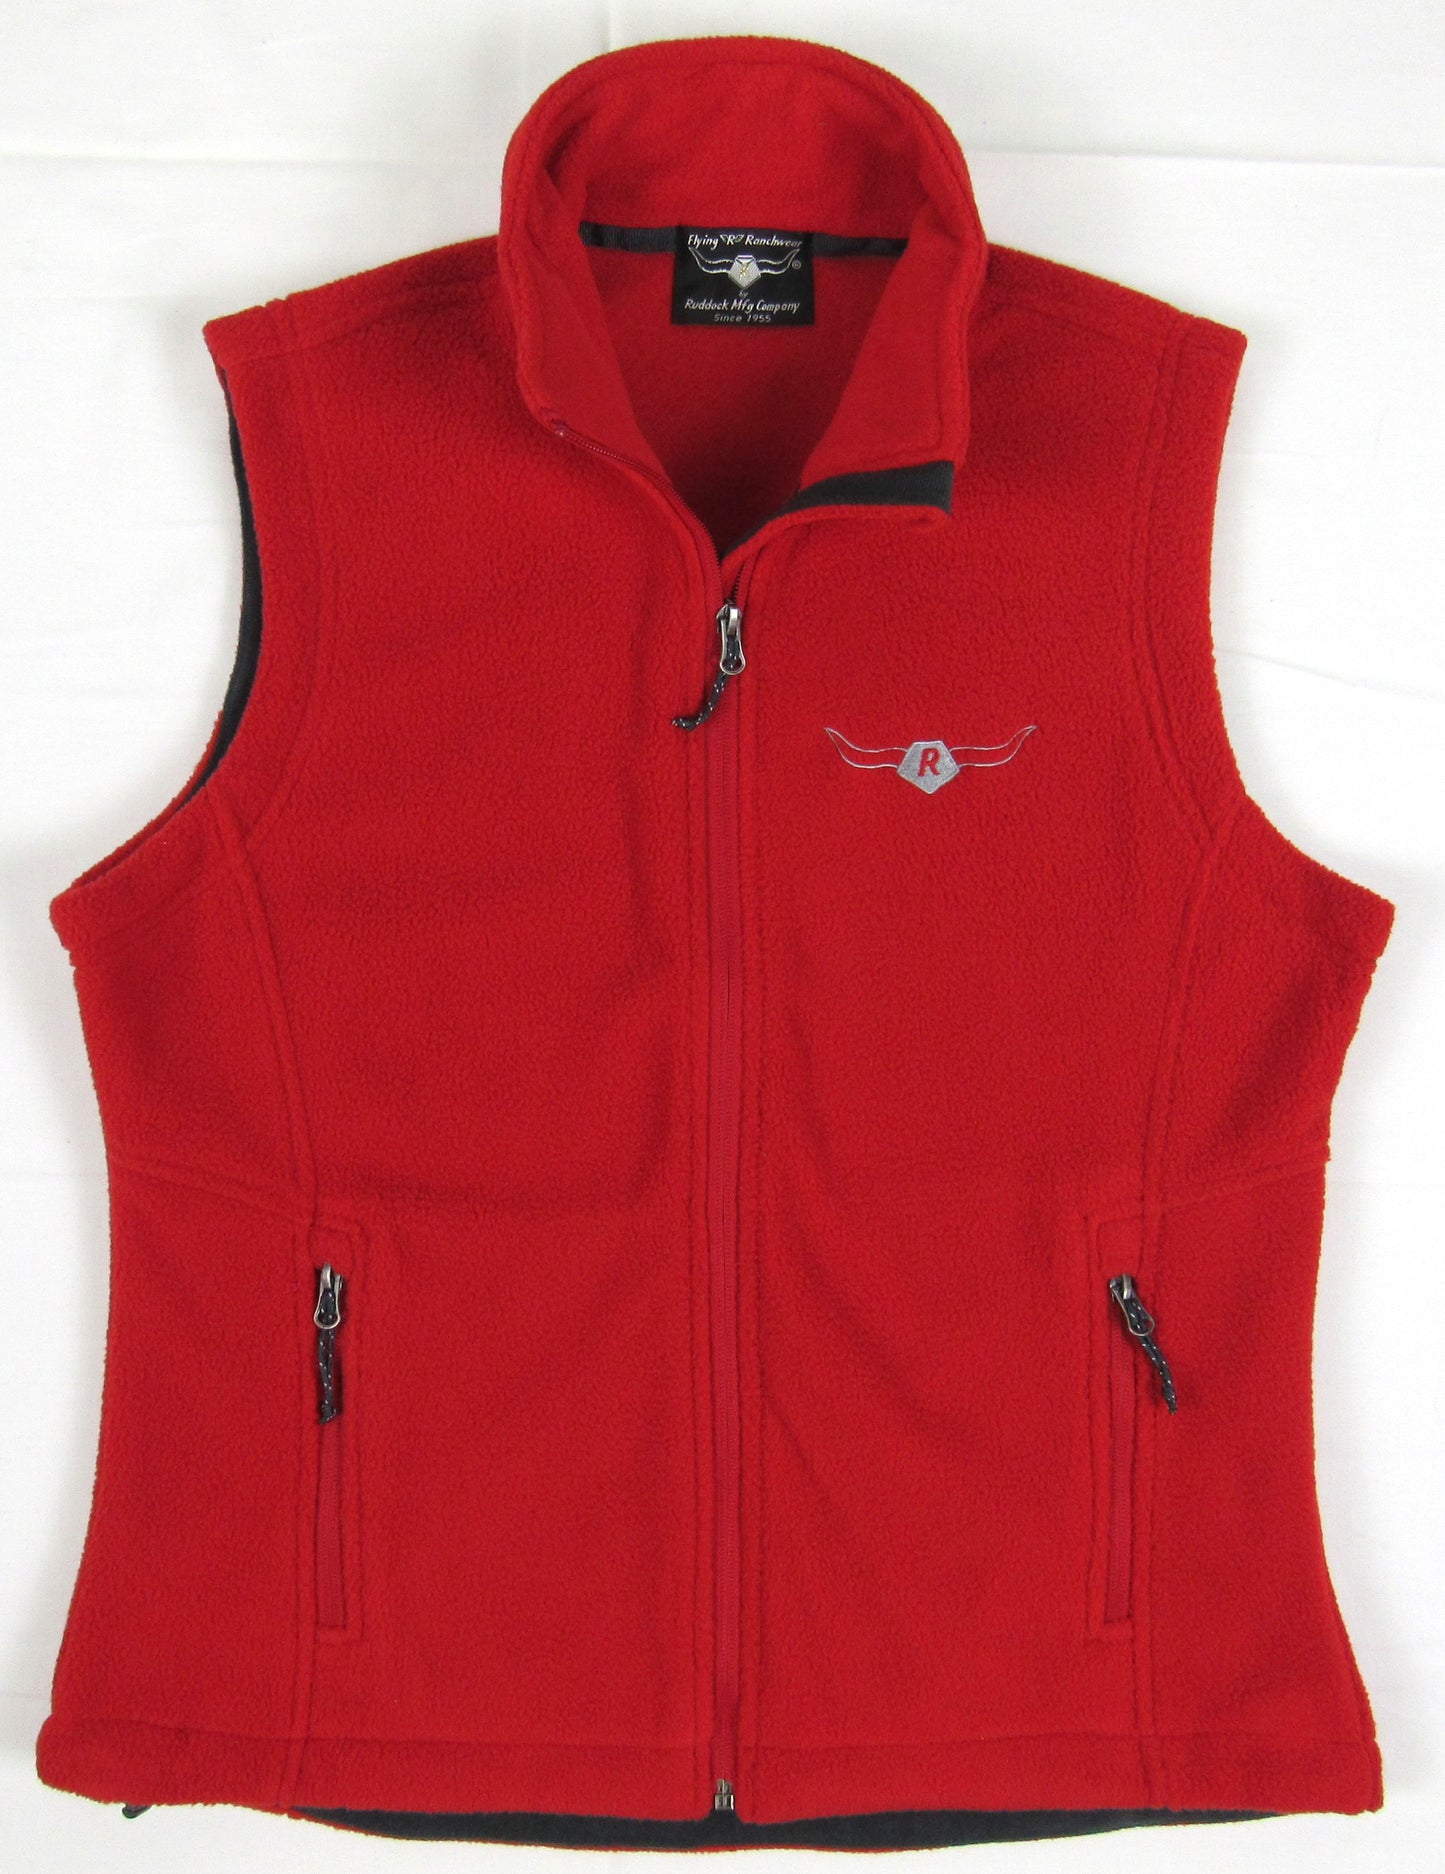 canyon fleece vest with zipper for ladies in red color